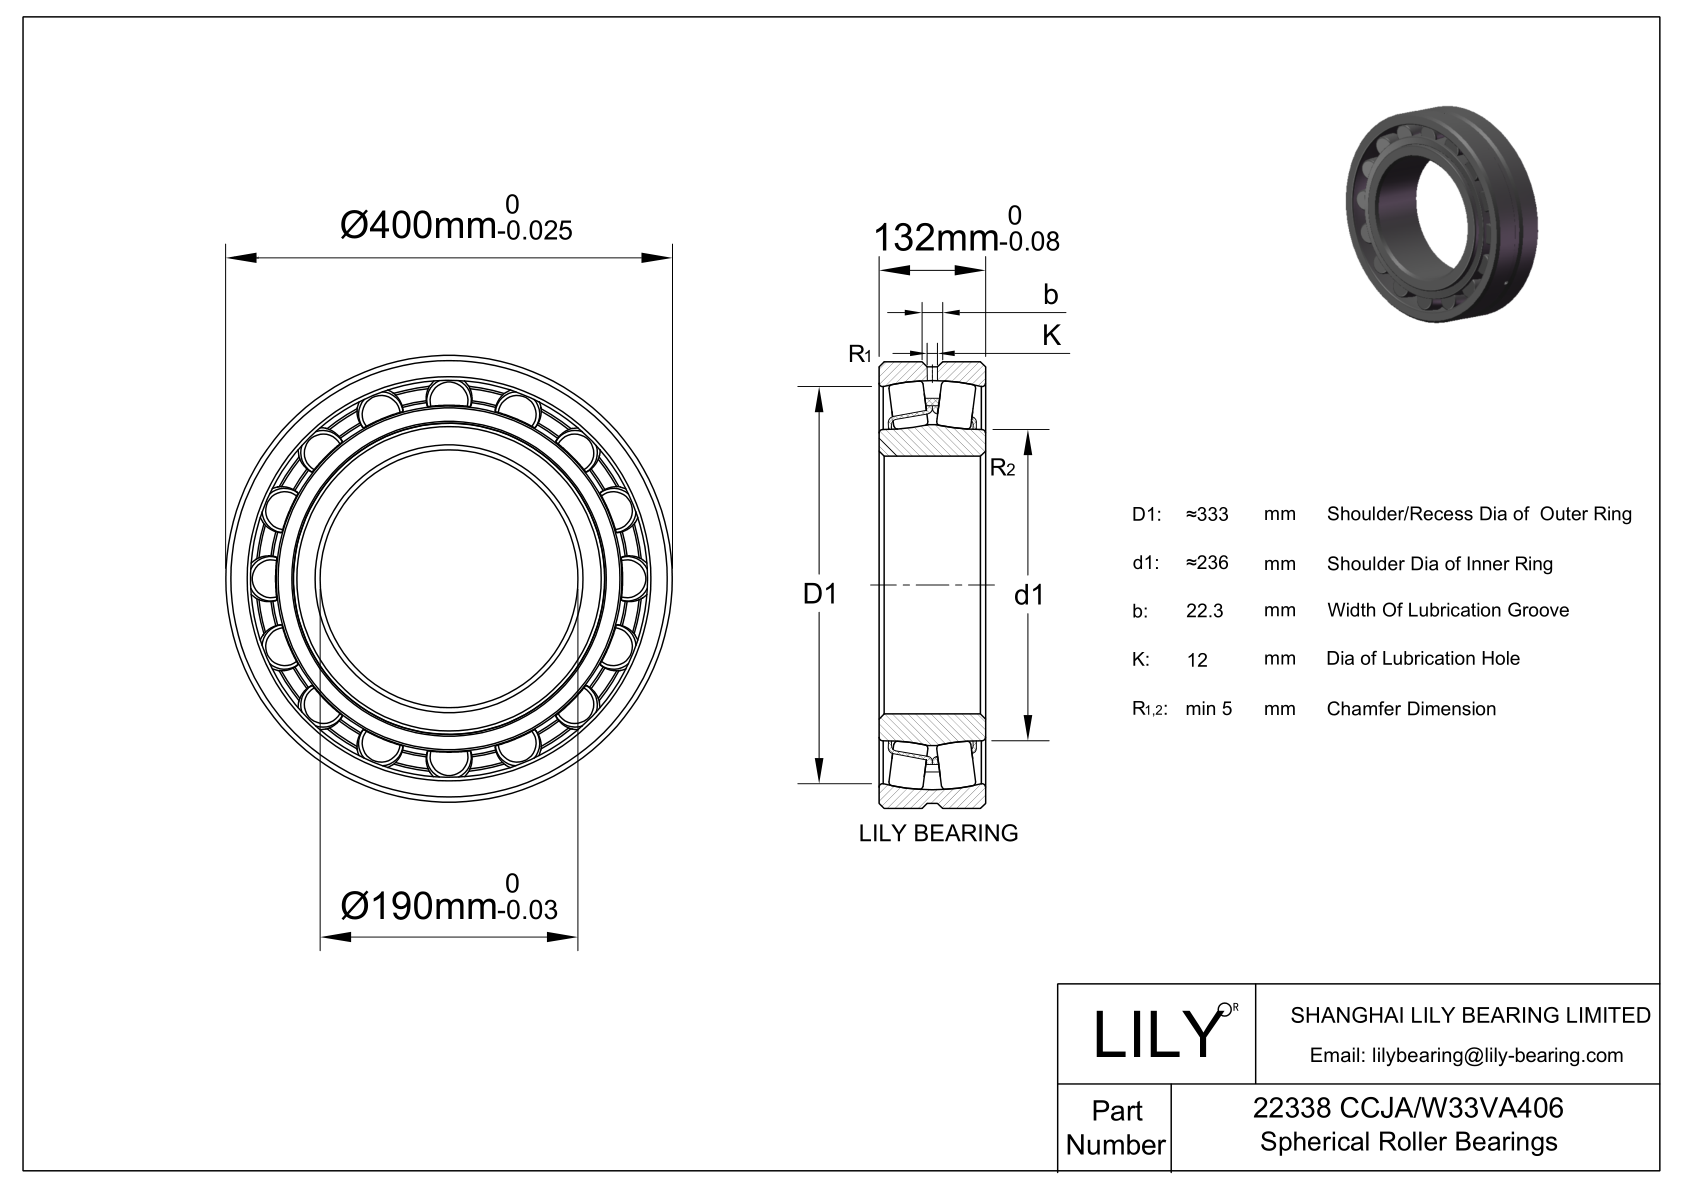 22338 CCJA/W33VA406 Double Row Spherical Roller Bearing cad drawing